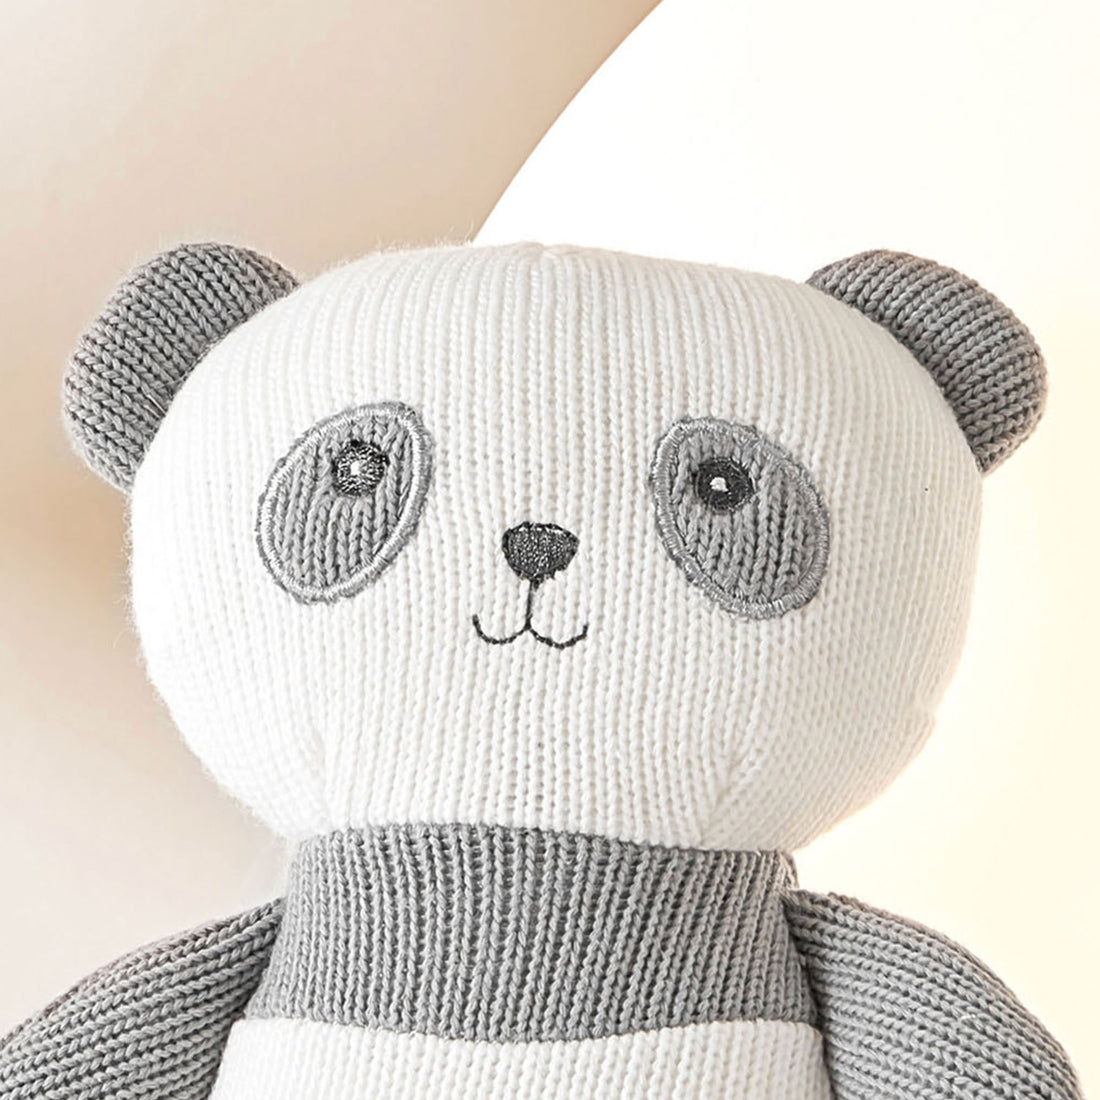 A close-up photo of a stuffed panda bear. The panda bear is made of soft, black and white fabric. It has round black eyes and a stitched black nose and mouth.